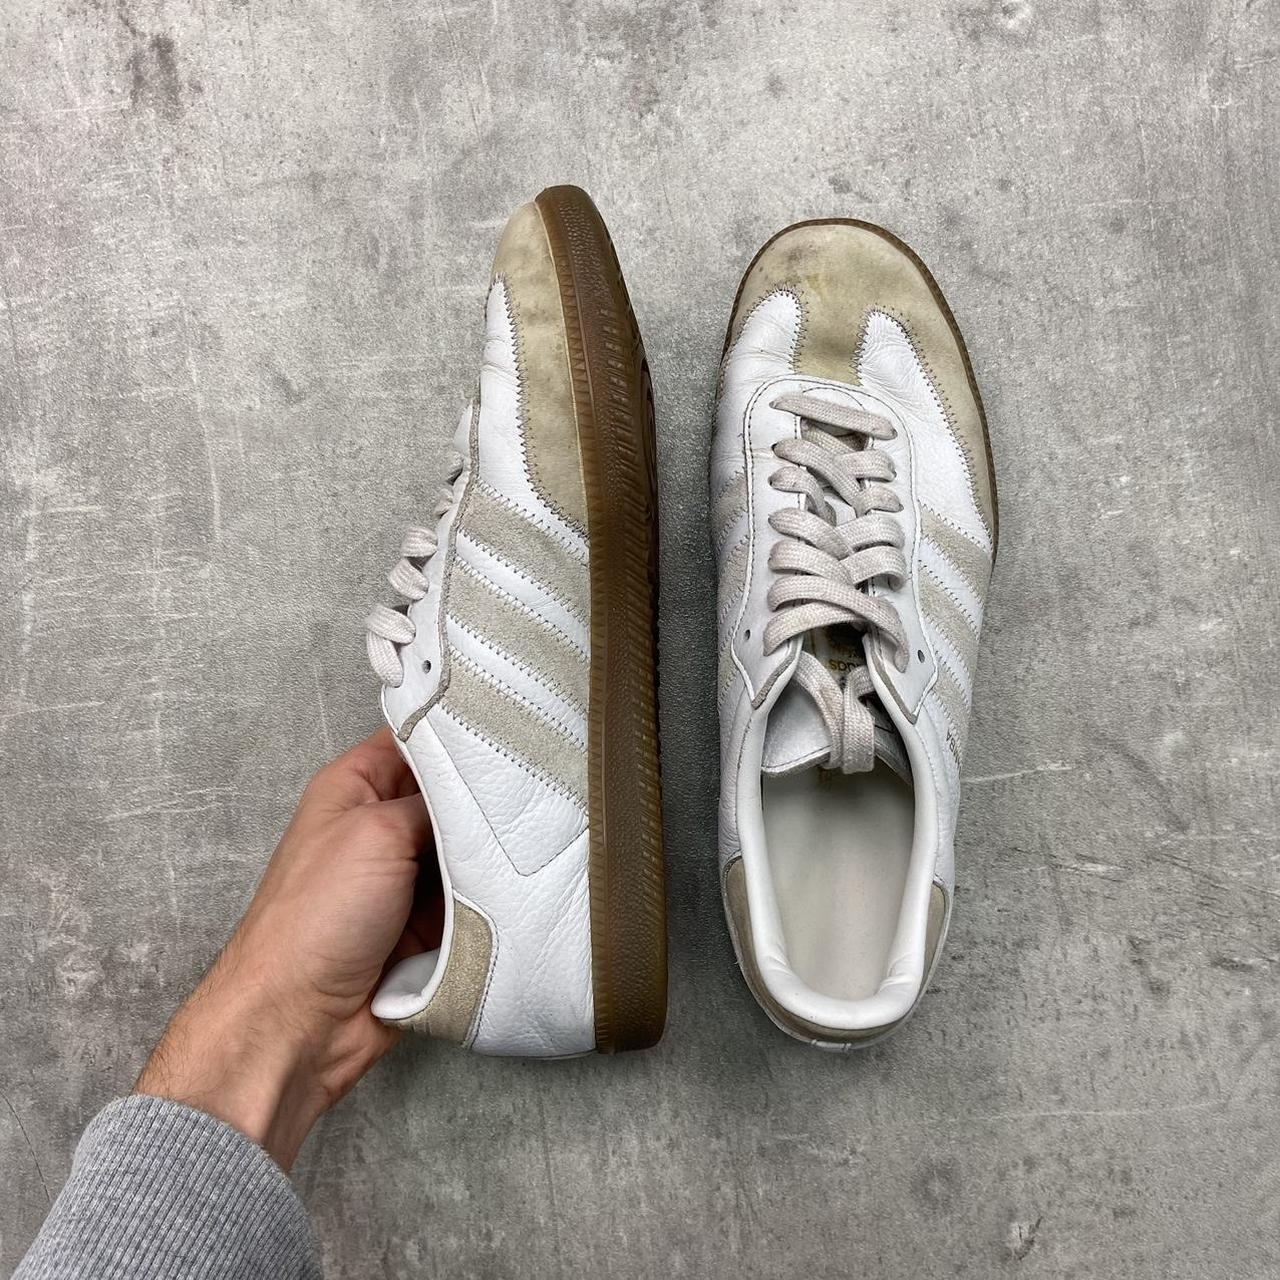 Adidas samba trainers in white leather and suede 🌊 - Depop